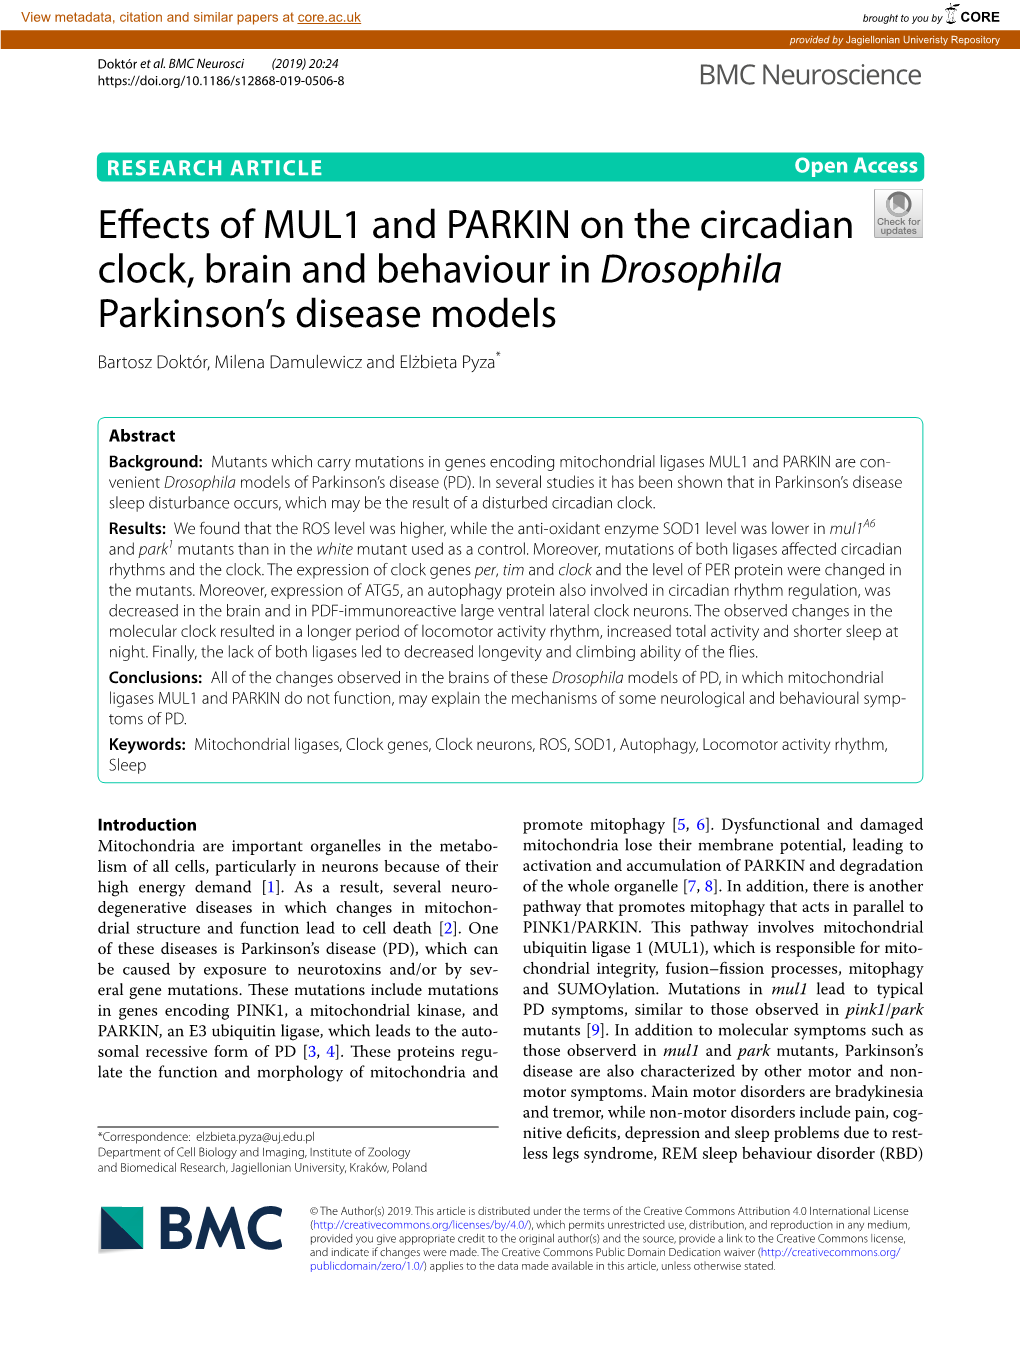 Effects of MUL1 and PARKIN on the Circadian Clock, Brain And